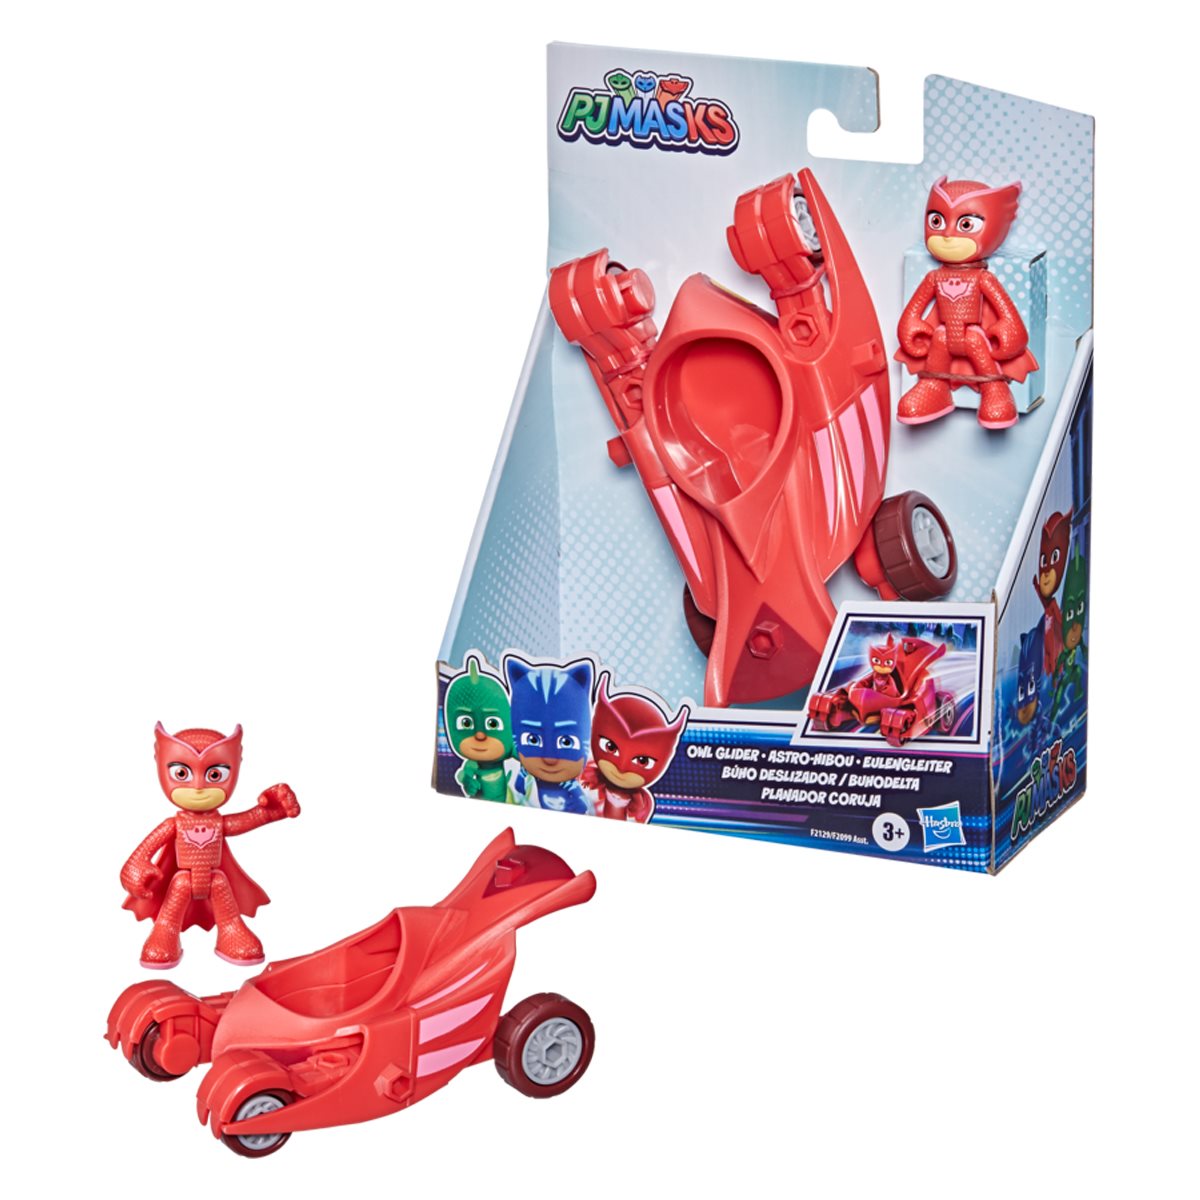  PJ Masks 3-in-1 Combiner Jet Preschool Toy, PJ Masks Toy Set  with 3 Connecting PJ Masks Cars and 3 Action Figures for Kids Ages 3 and Up  : Toys & Games